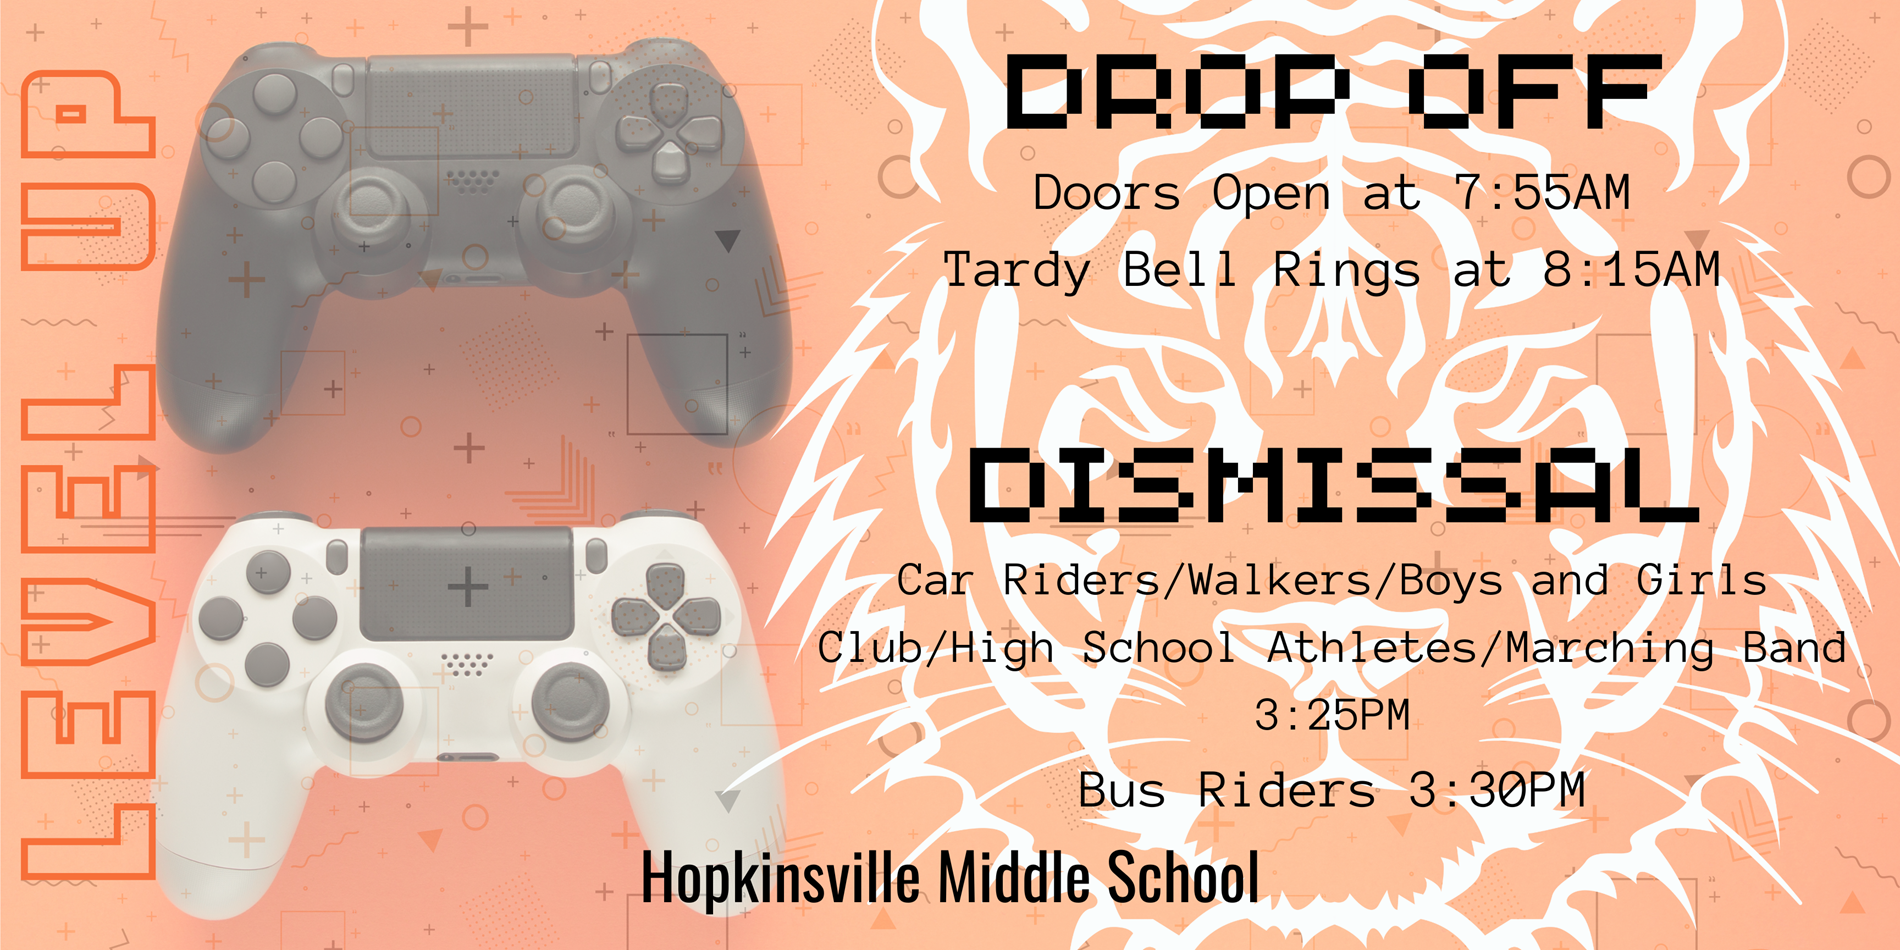 Drop Off and Dismissal Times